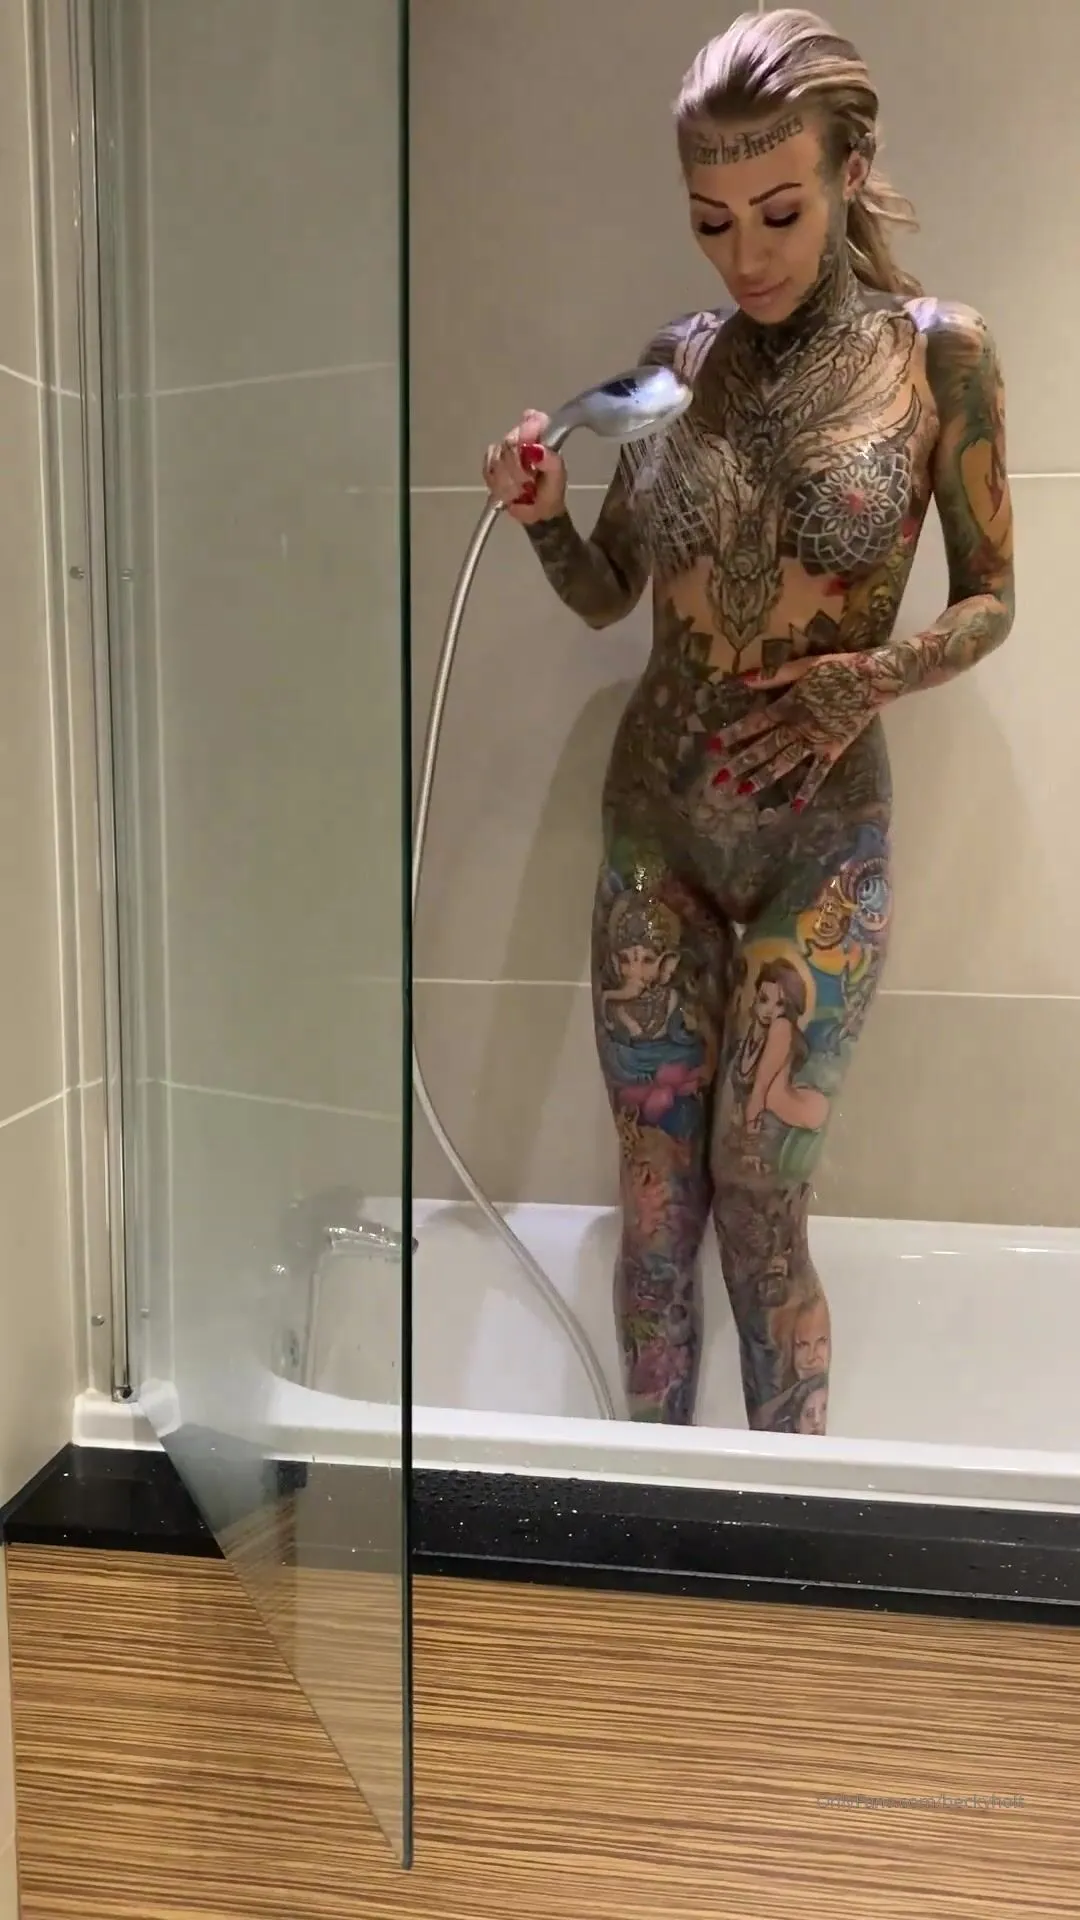 Becky Holt Porn - Beckyholt 16 02 2020 22353454 shower time who wants to cum and wash me off  onlyfans xxx porn videos